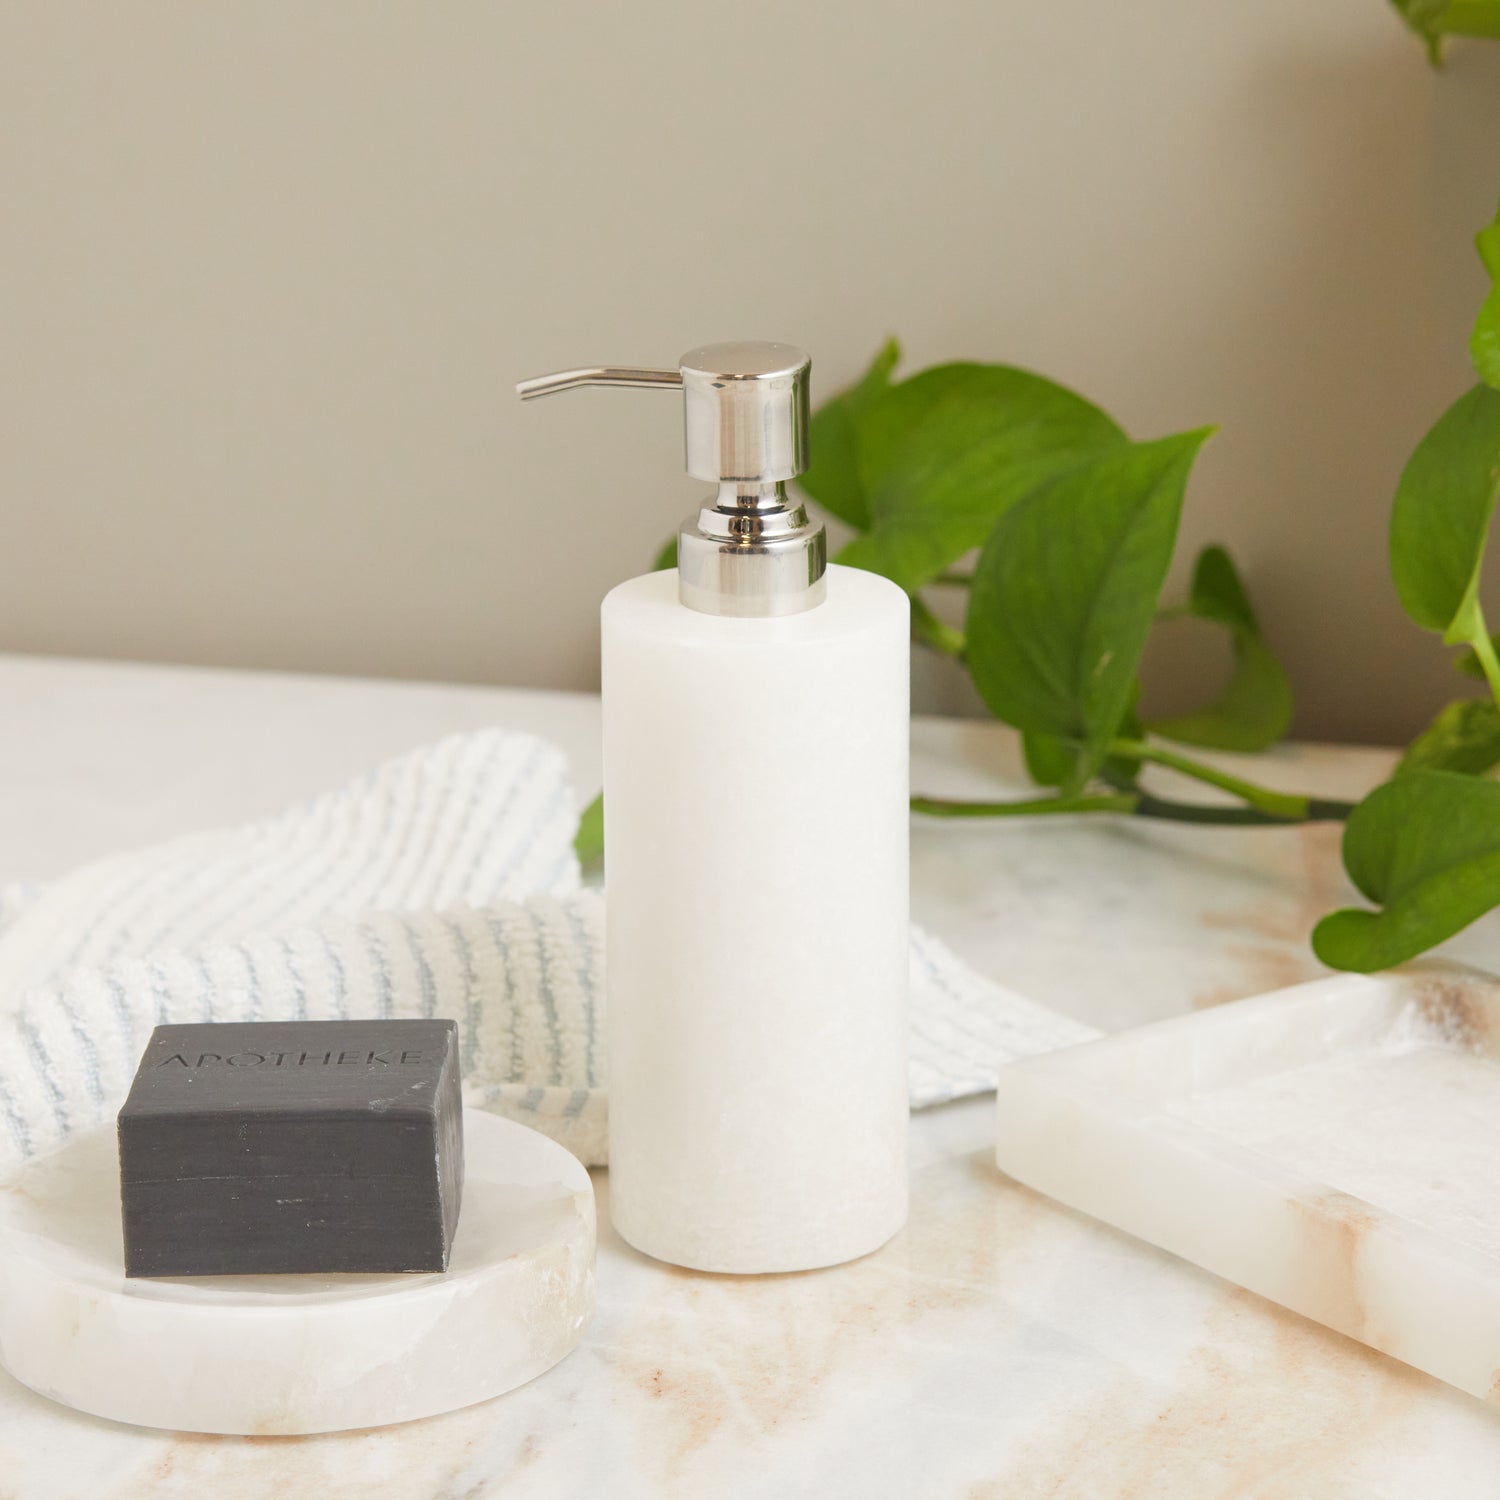 Alabaster Tray  Soap Dispenser And Brush Tray - The Polished Jar